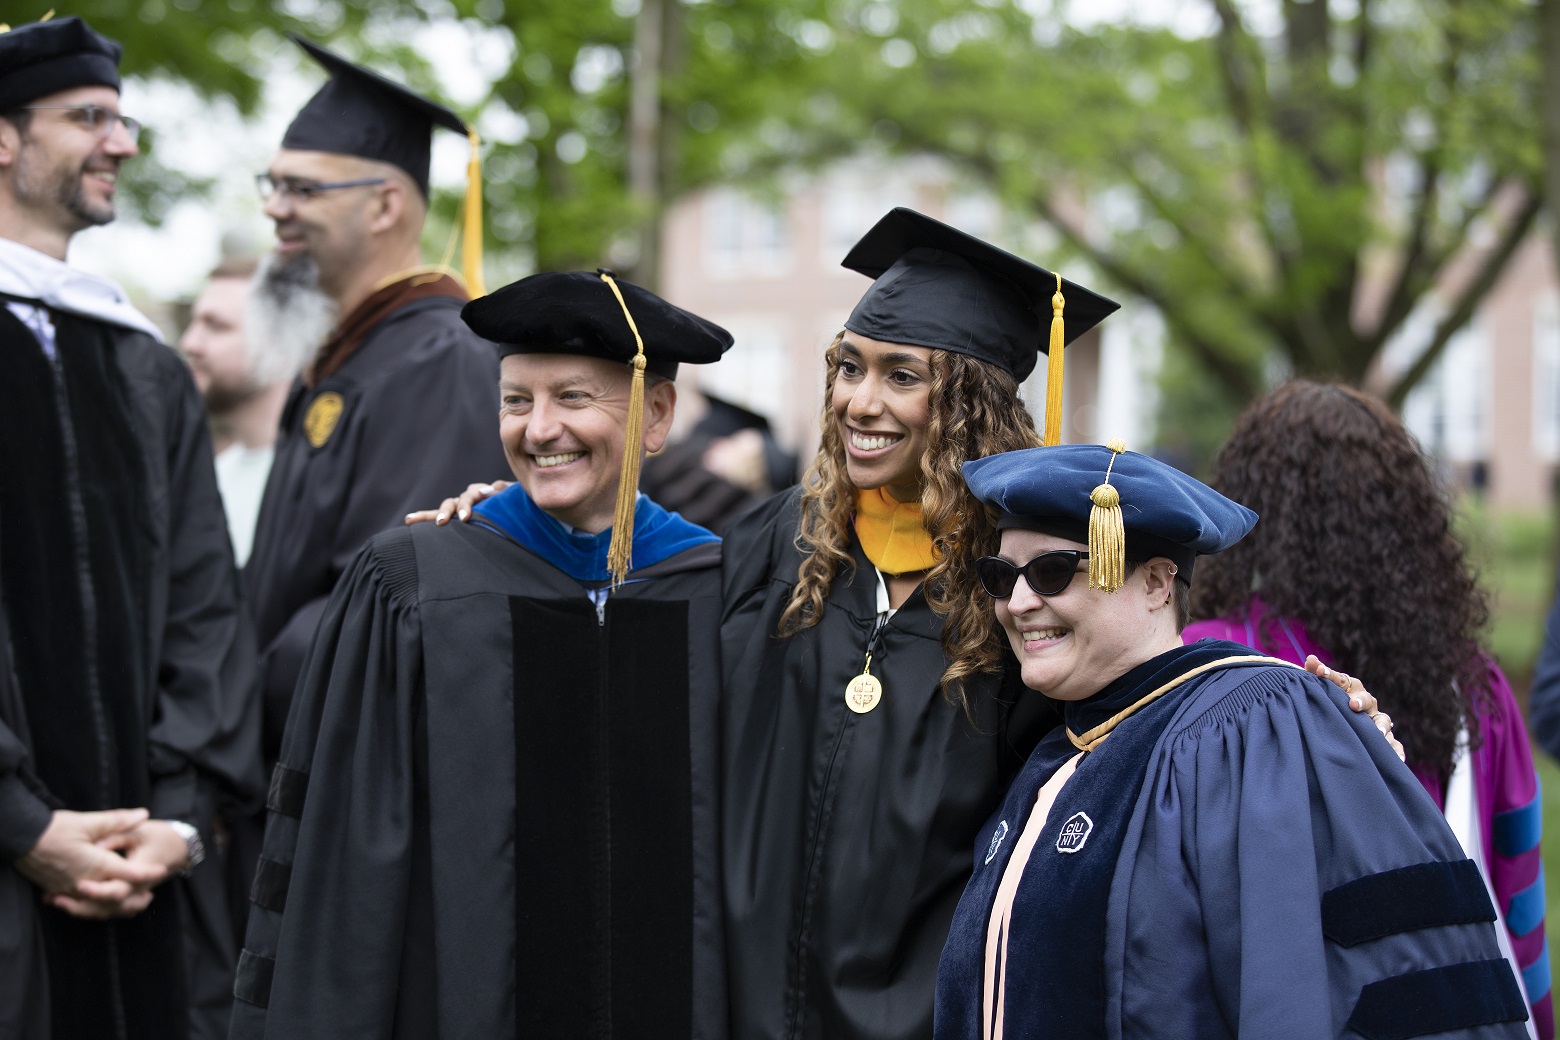 Bridgewater College Celebrates the Class of 2022 During Commencement Ceremony on May 7